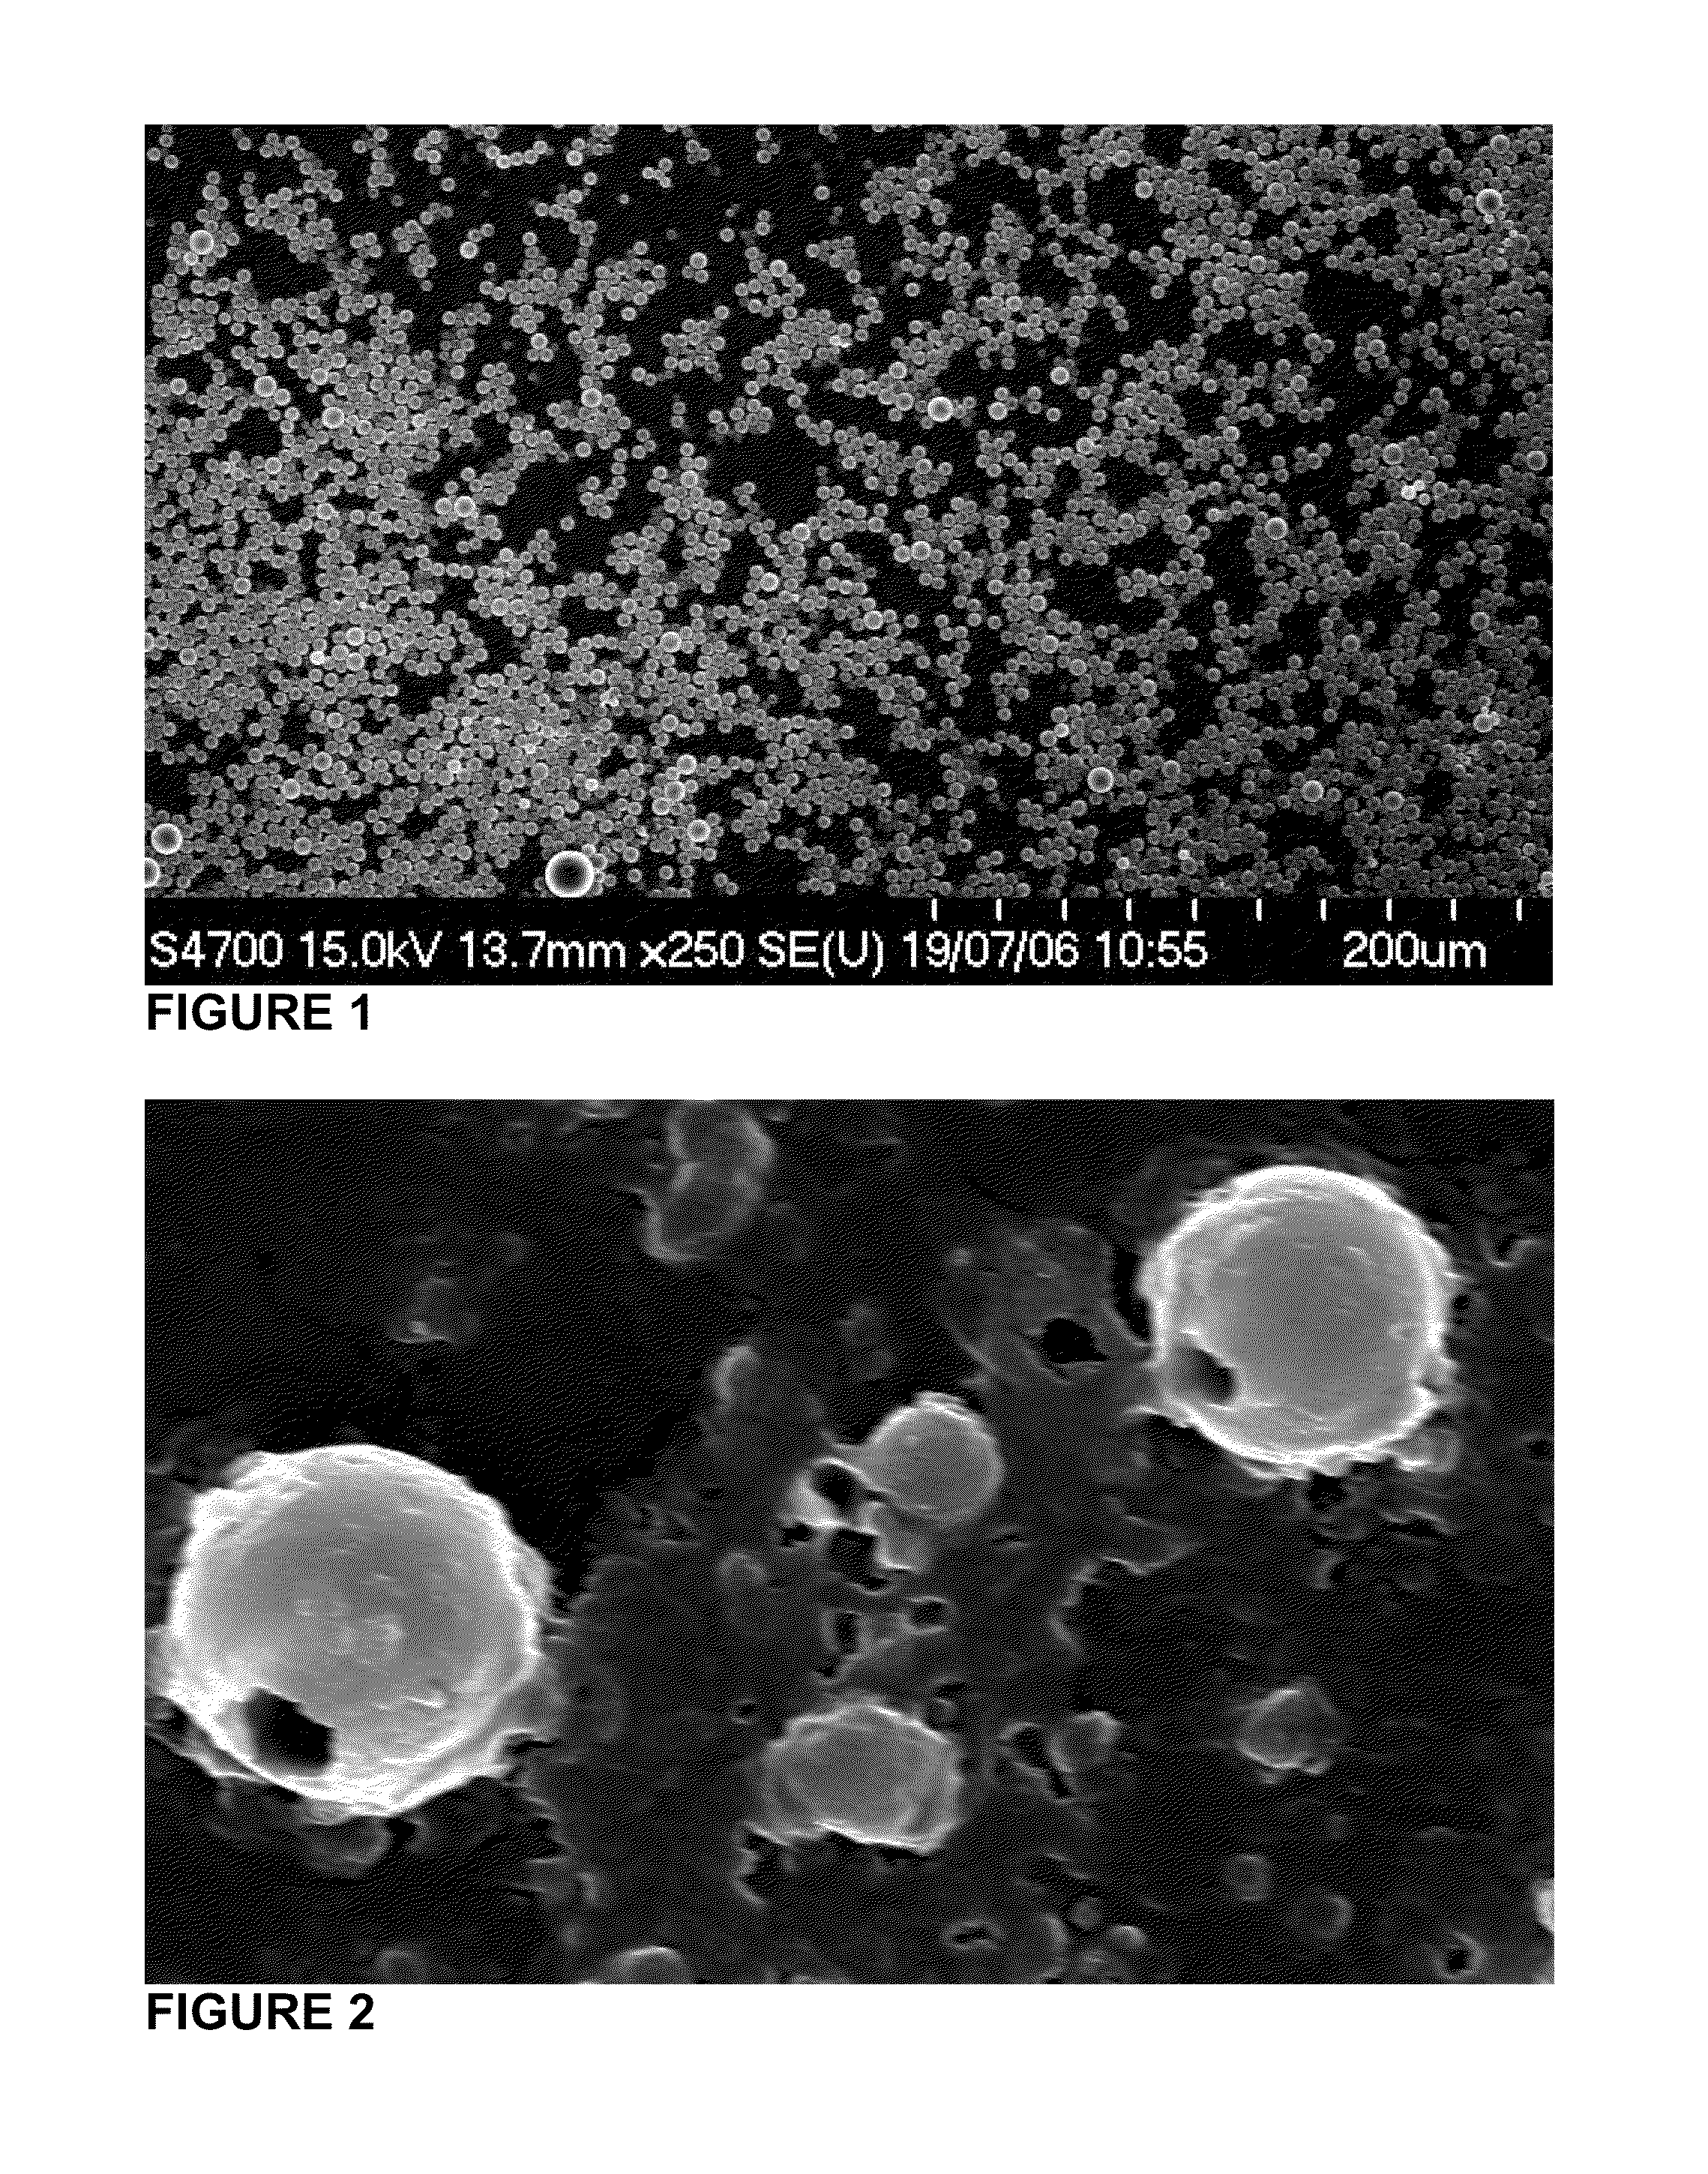 Hollow biodegradable nanospheres and nanoshells for delivery of therapeutic and/or imaging molecules